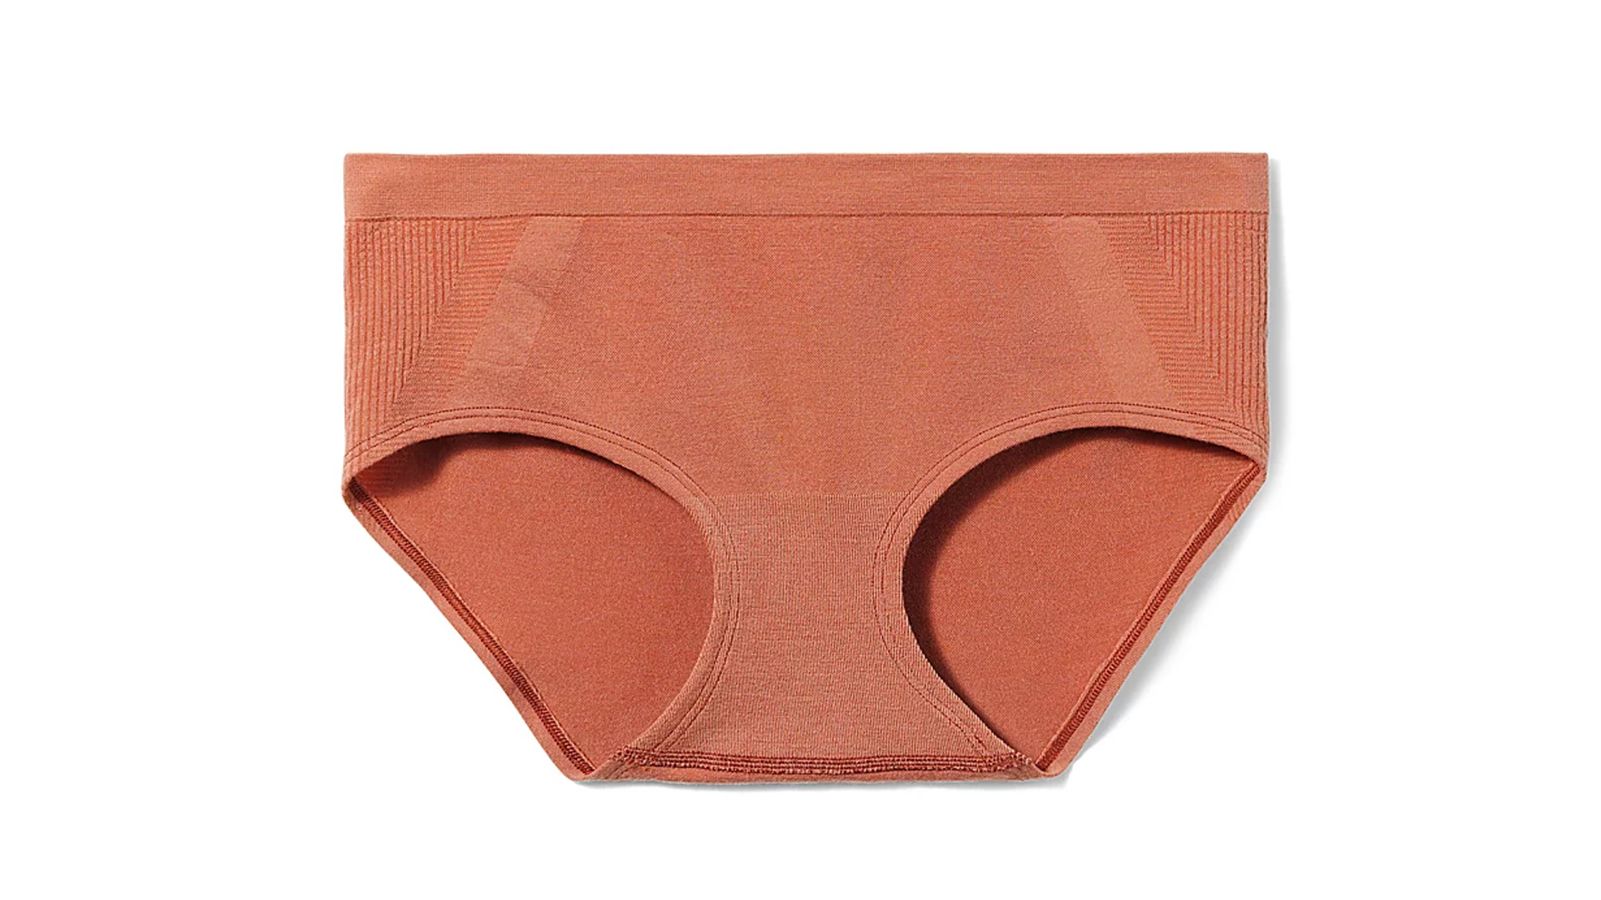 The 10 Best Hiking Underwear for Women (Trail-Tested & Highly